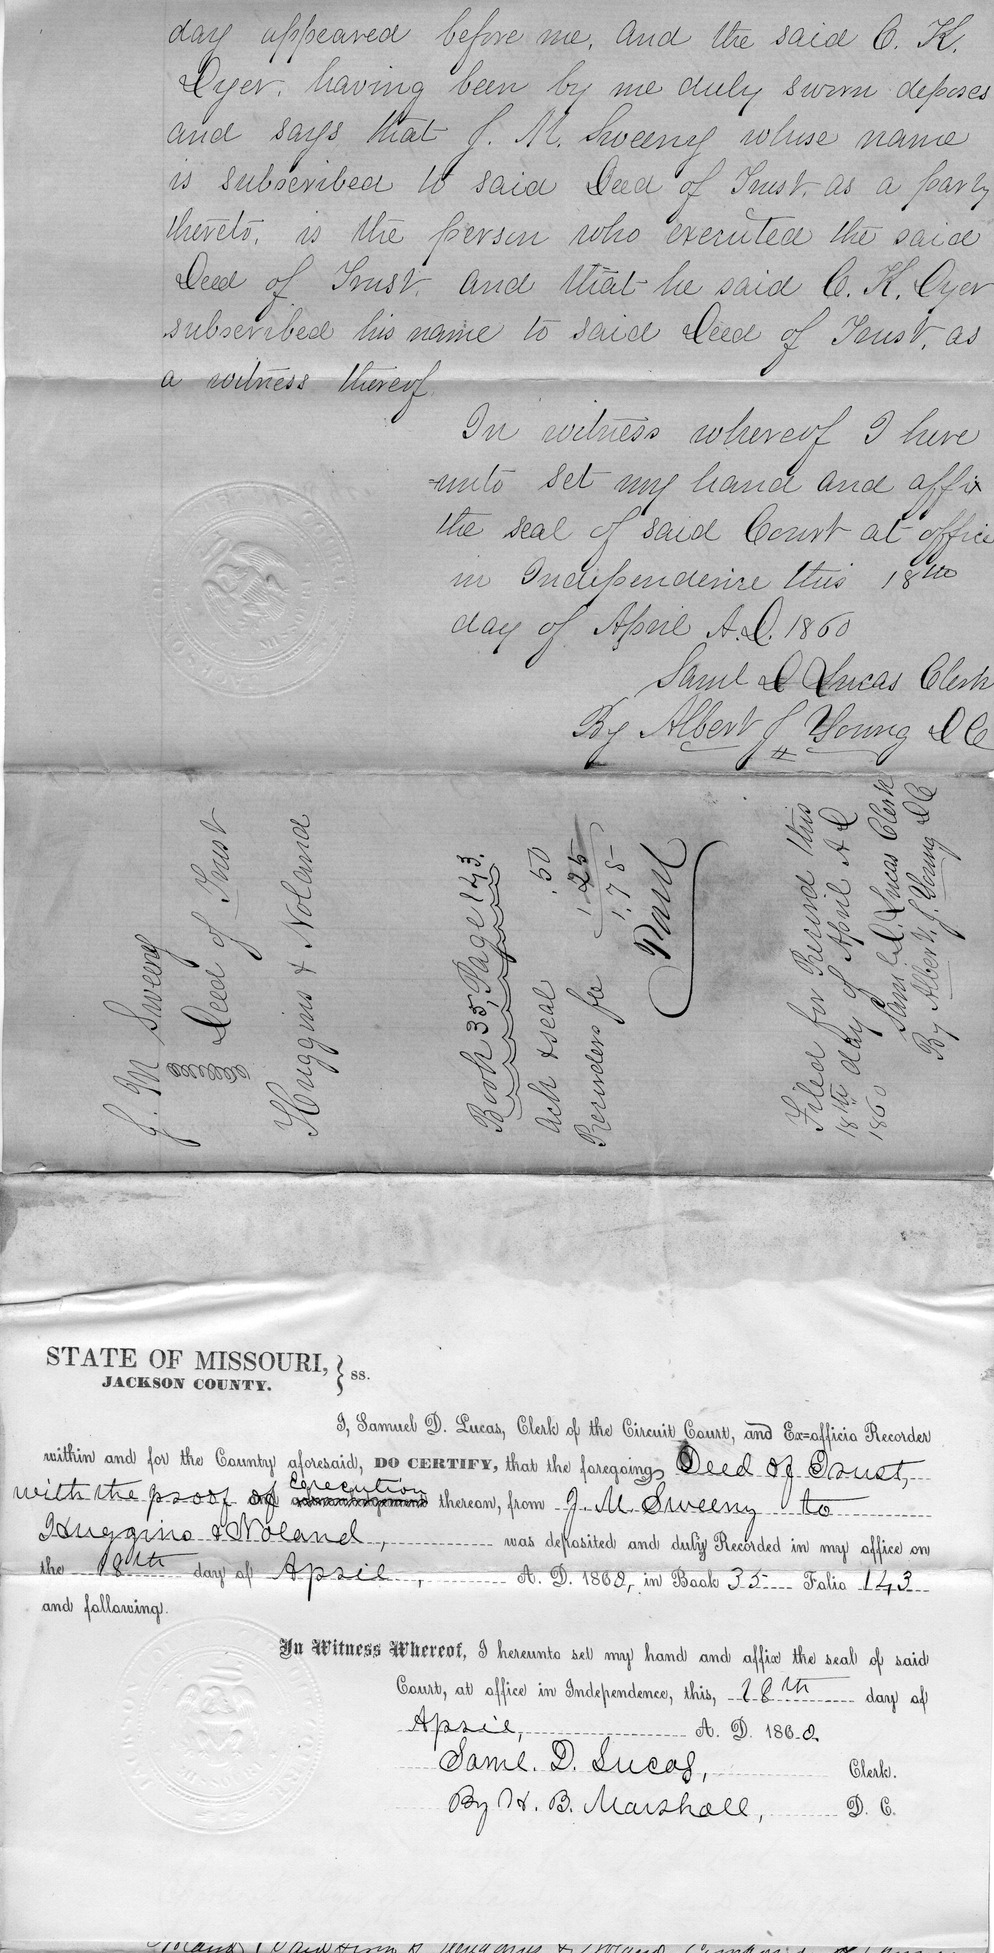 Deed of Trust from J. M. Sweeny to Huggins & Noland